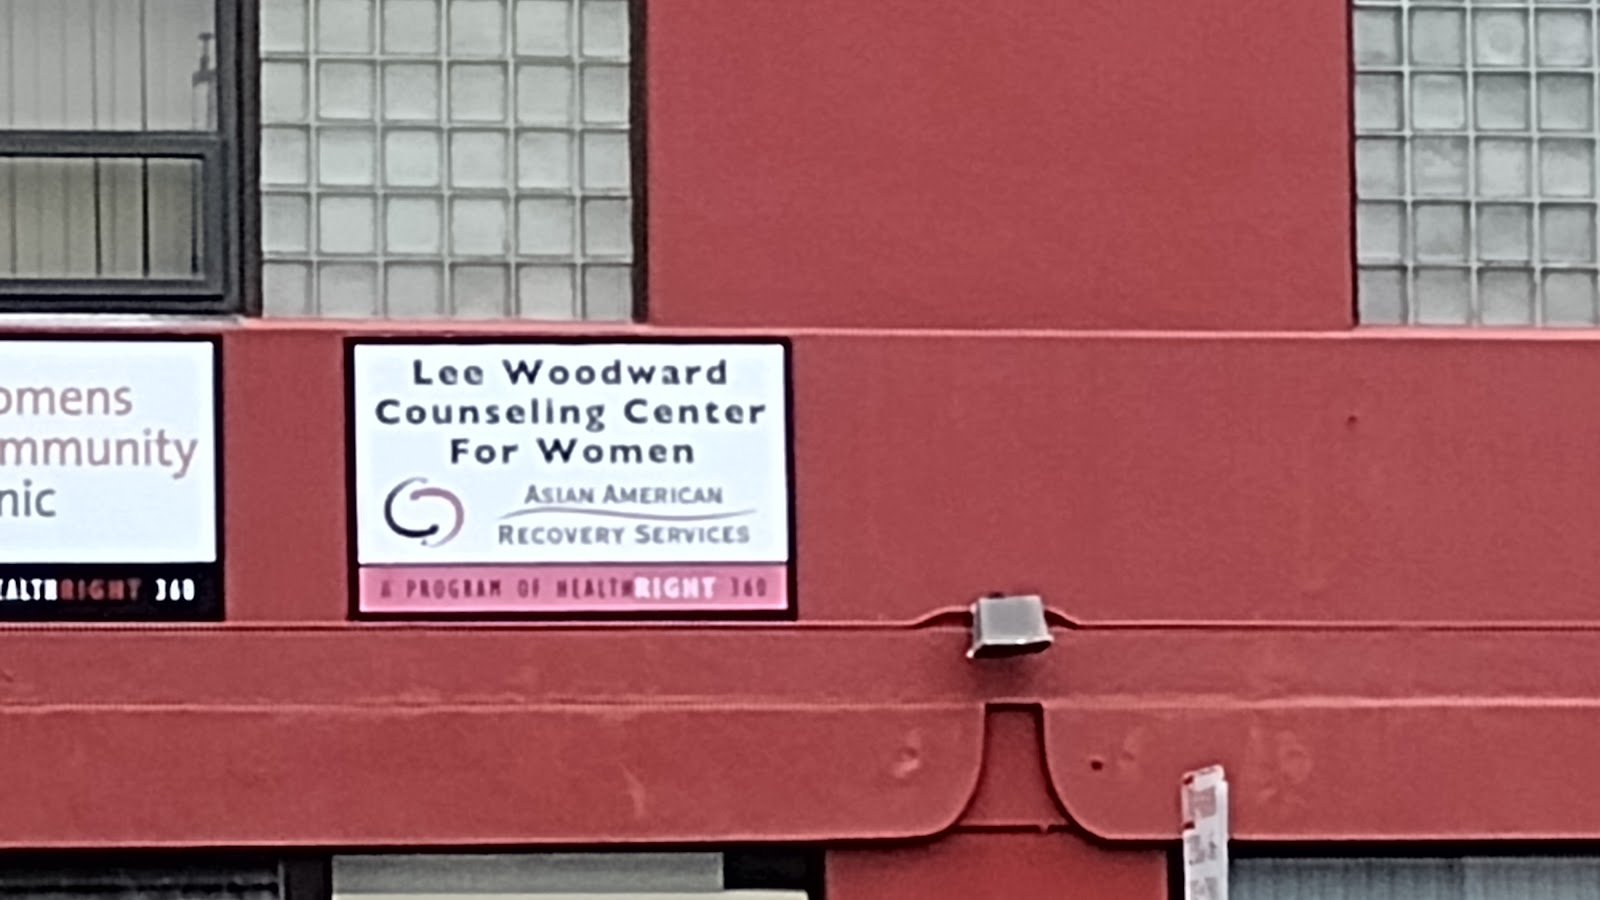 LWCC - Lee Woodward Counseling Center for Women